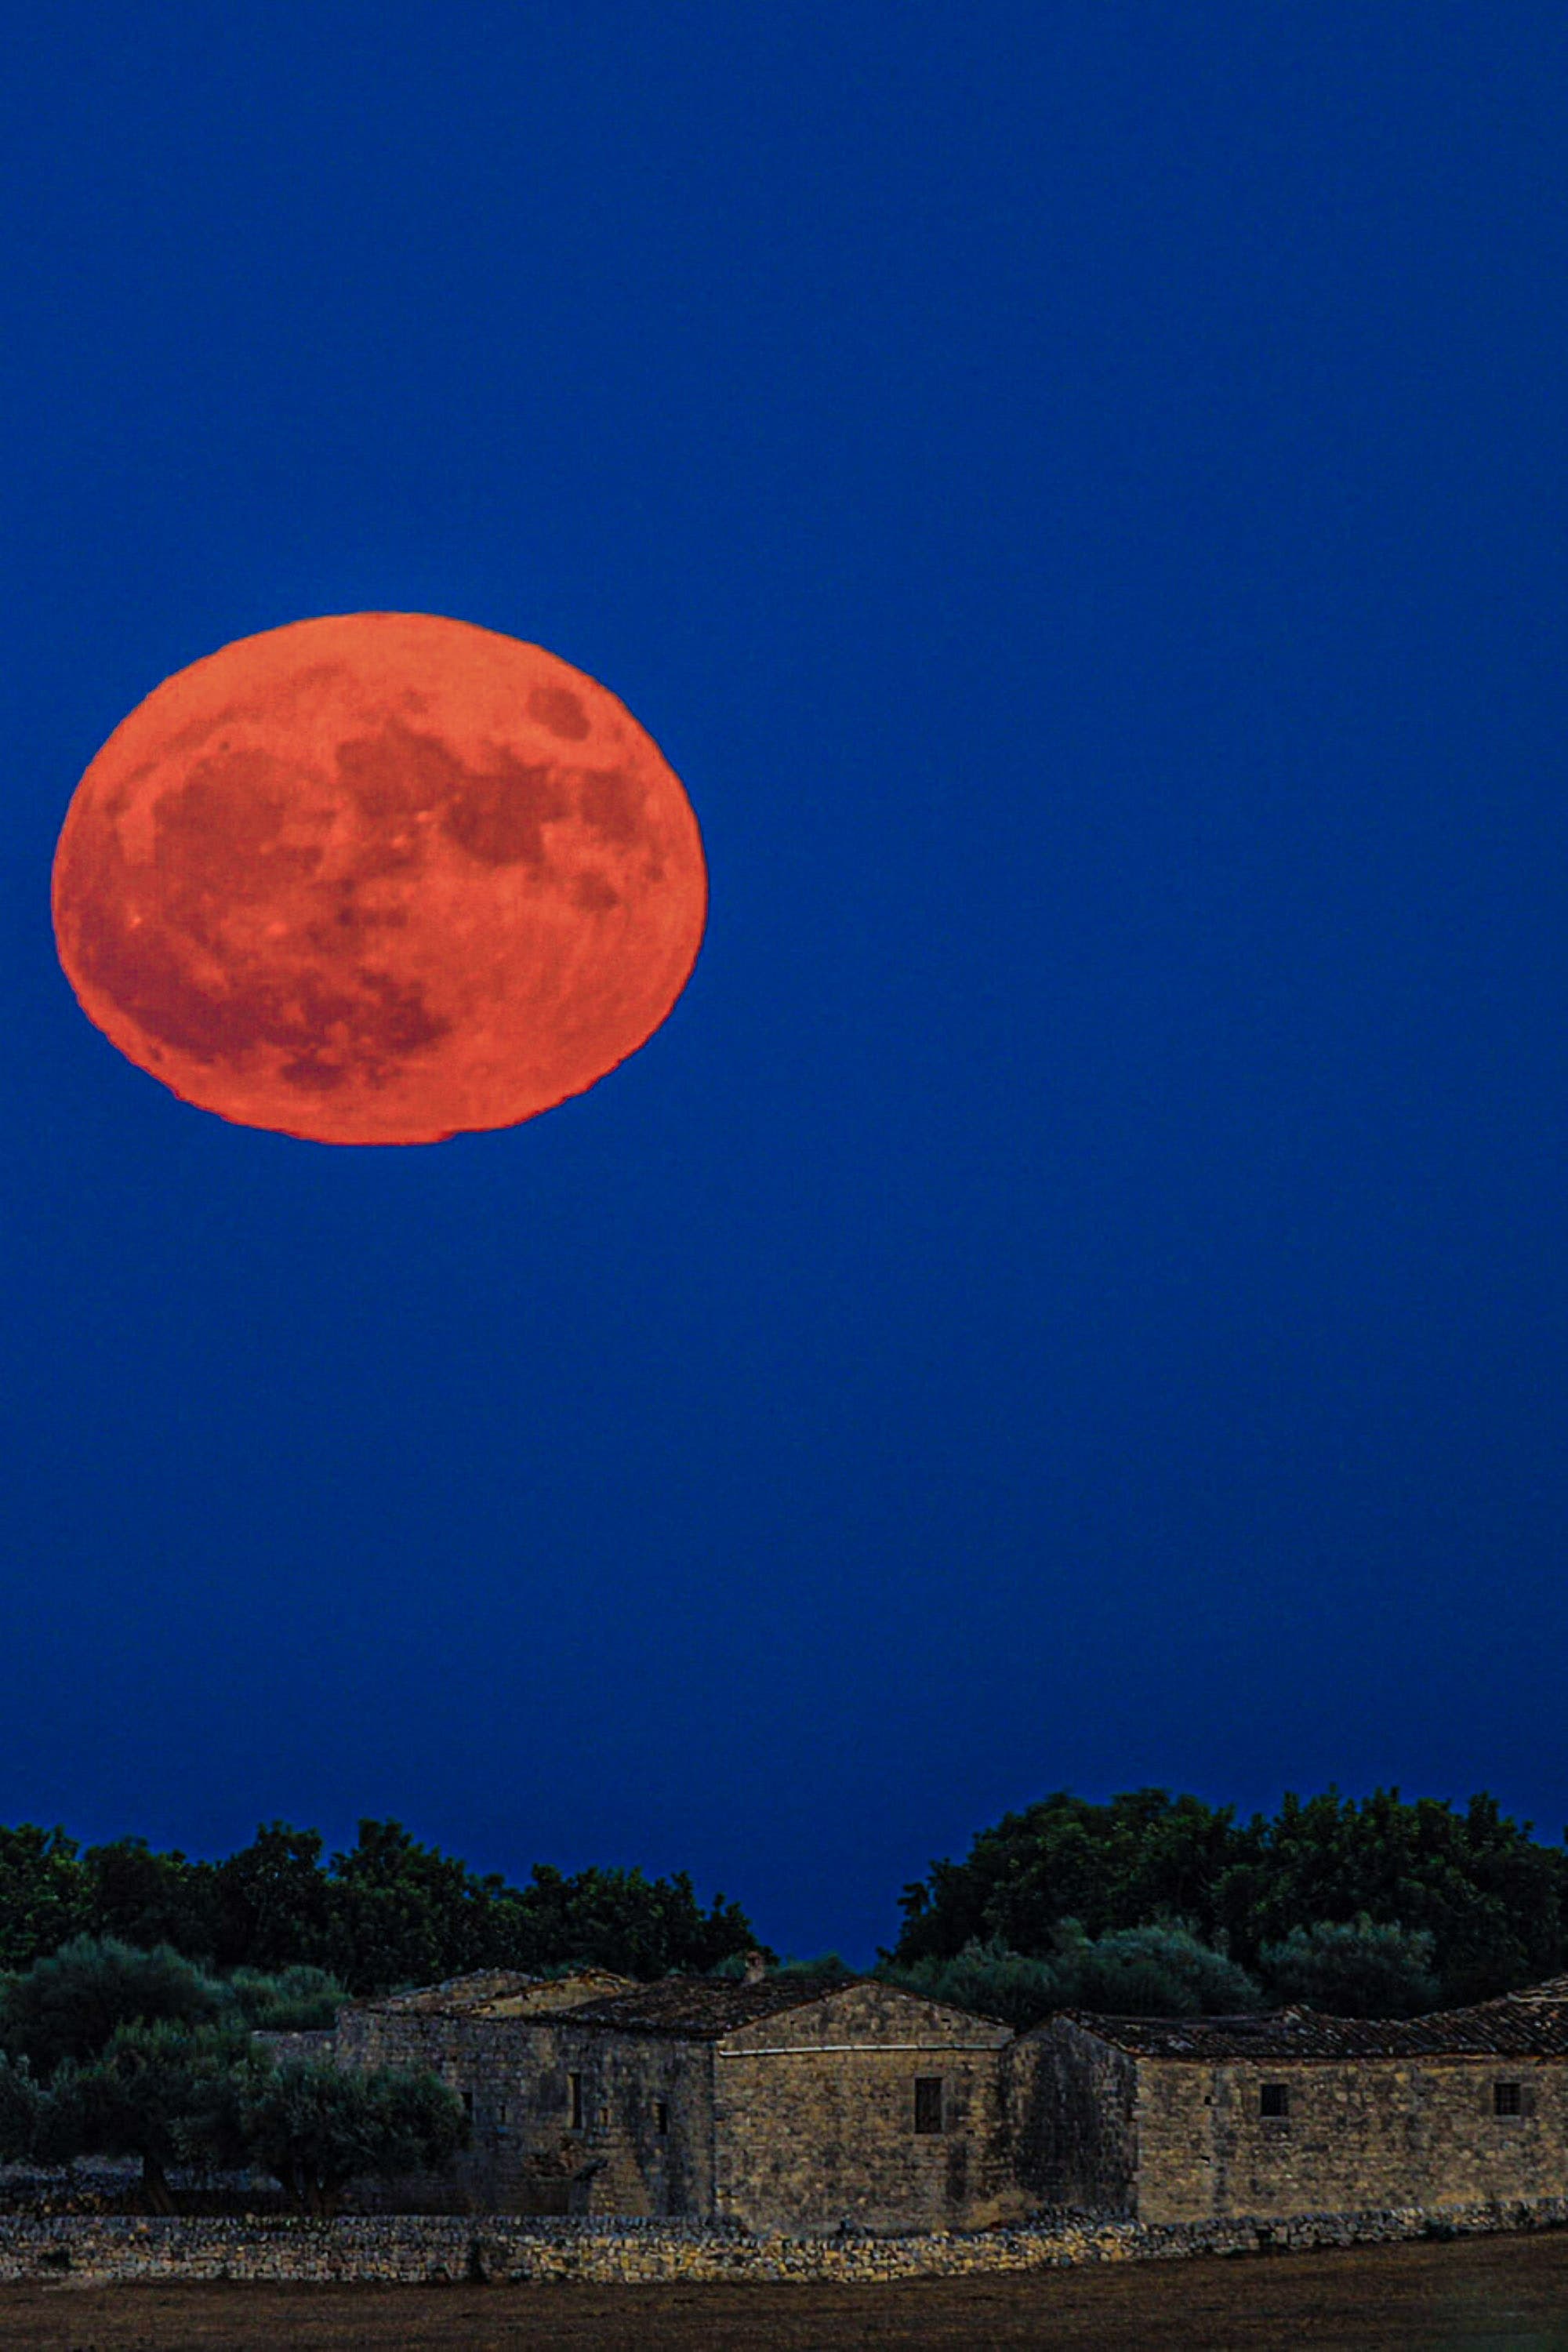 Red Moon-100% over the Ragusa countryside Sicily